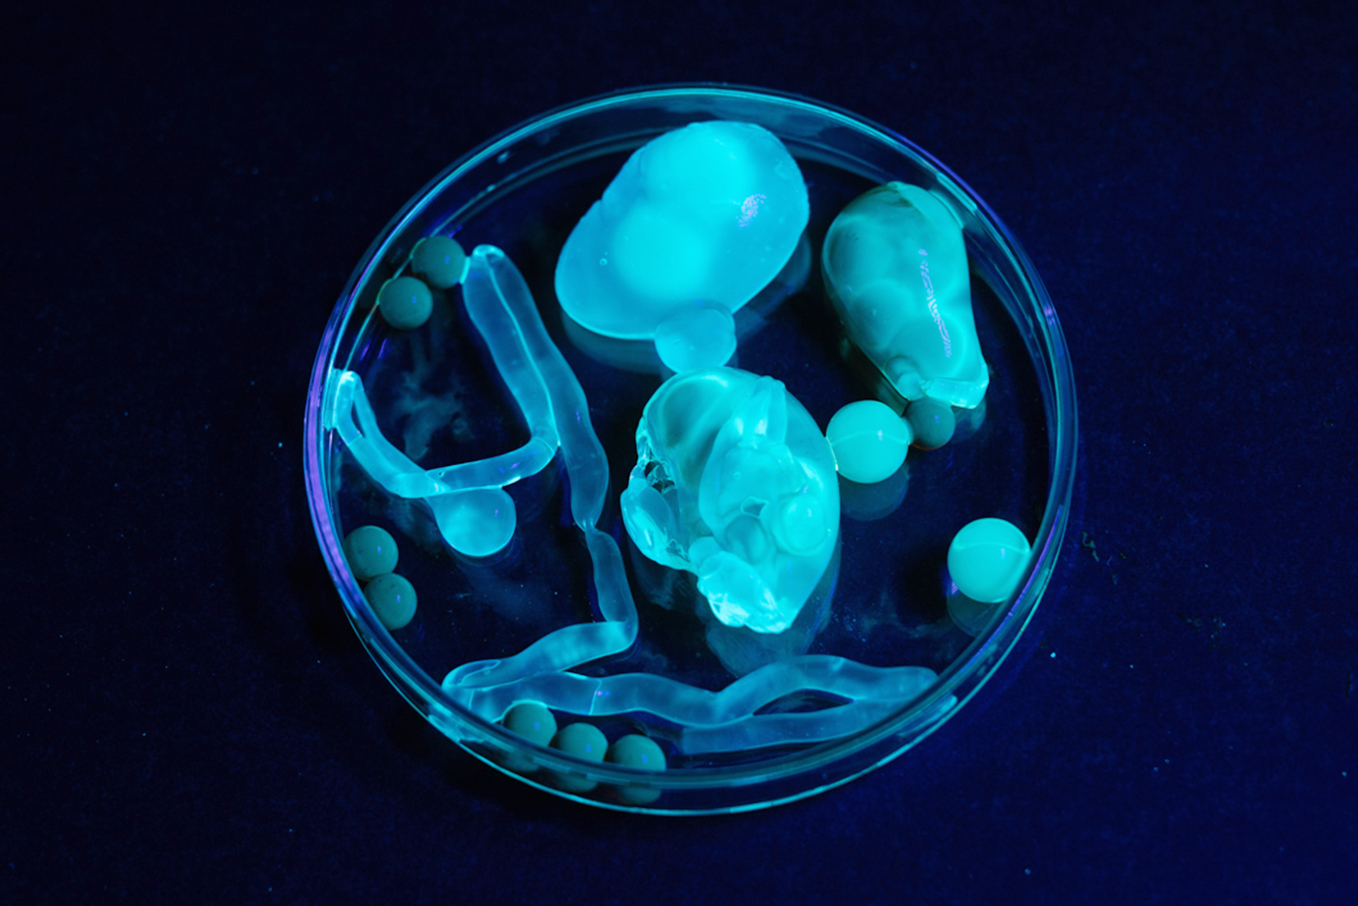 A group of glow-in-the-dark gelatinous items in a glass petri dish under UV light.